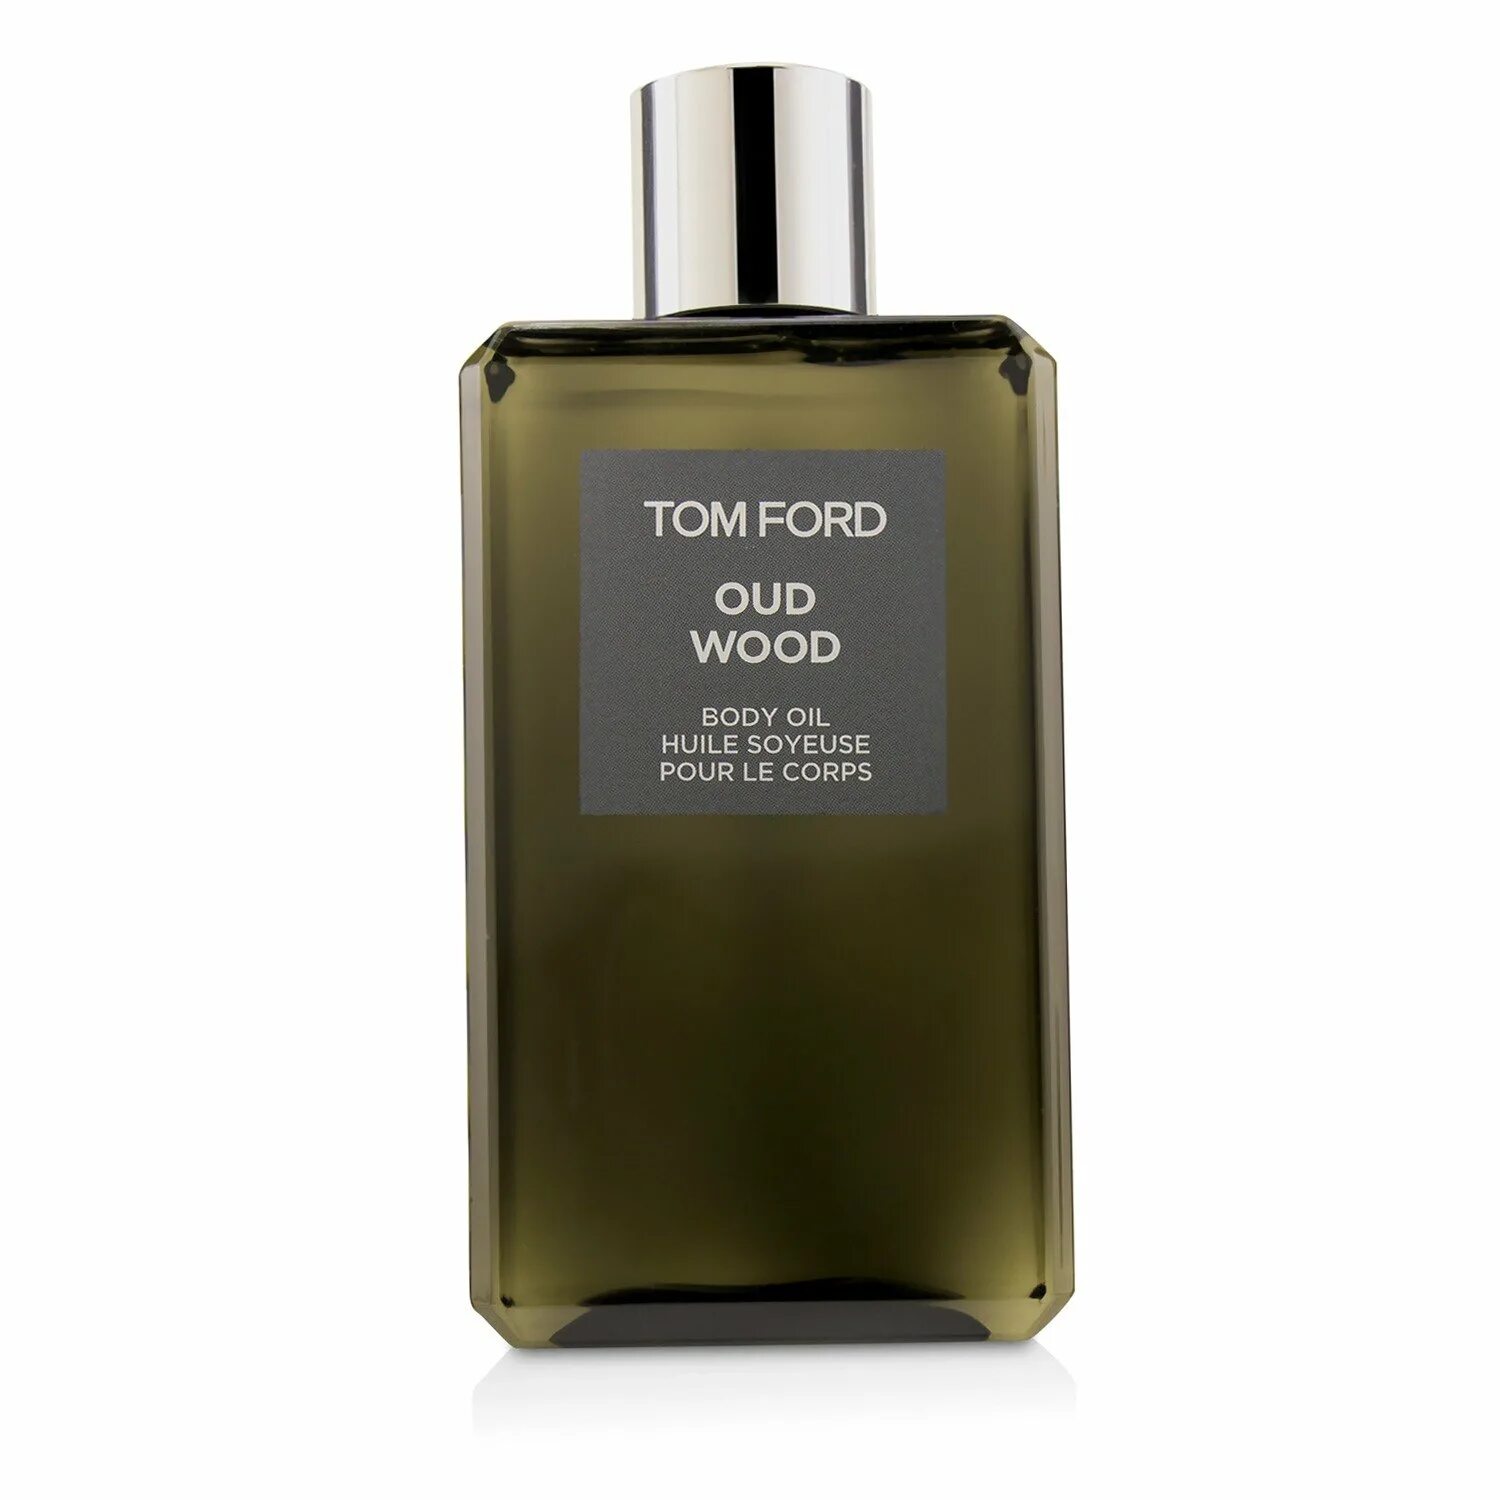 Масло tom ford. Tom Ford oud Wood масло. Tom Ford oud Wood 8 мл. Tom Ford body Oil. Tom Ford body Oil 250ml.